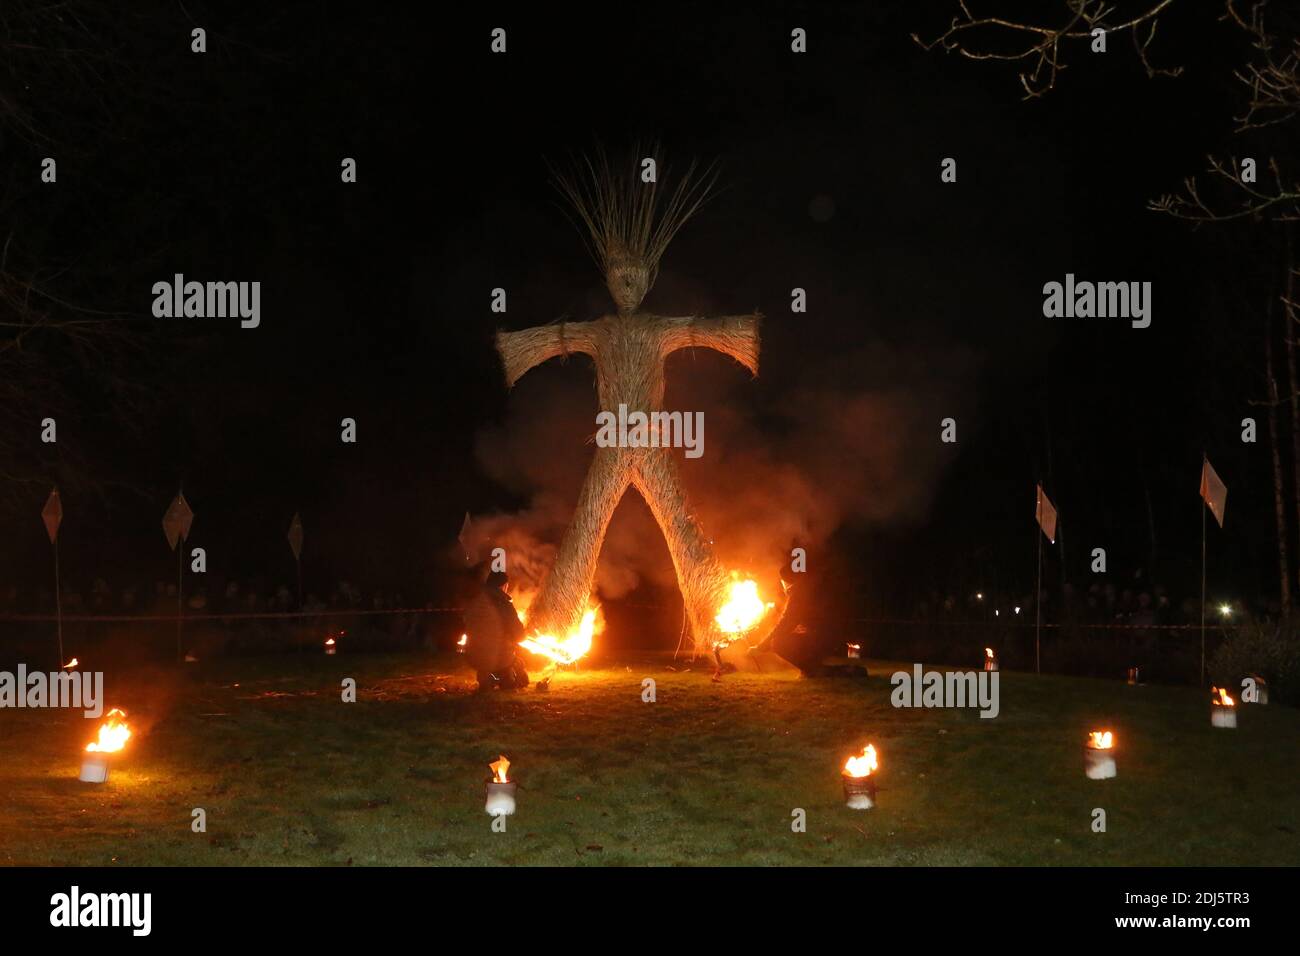 Burns a alight, A night time display of light and fire to celebrate Robert Burns Bith in January 1759, held at the Burn Monuments and Robert Burns Birthplace Museum, Alloway, Ayrshire, Scotland, UK.23 Jan 2016. The evening culminated in the burning of a wicker man Stock Photo